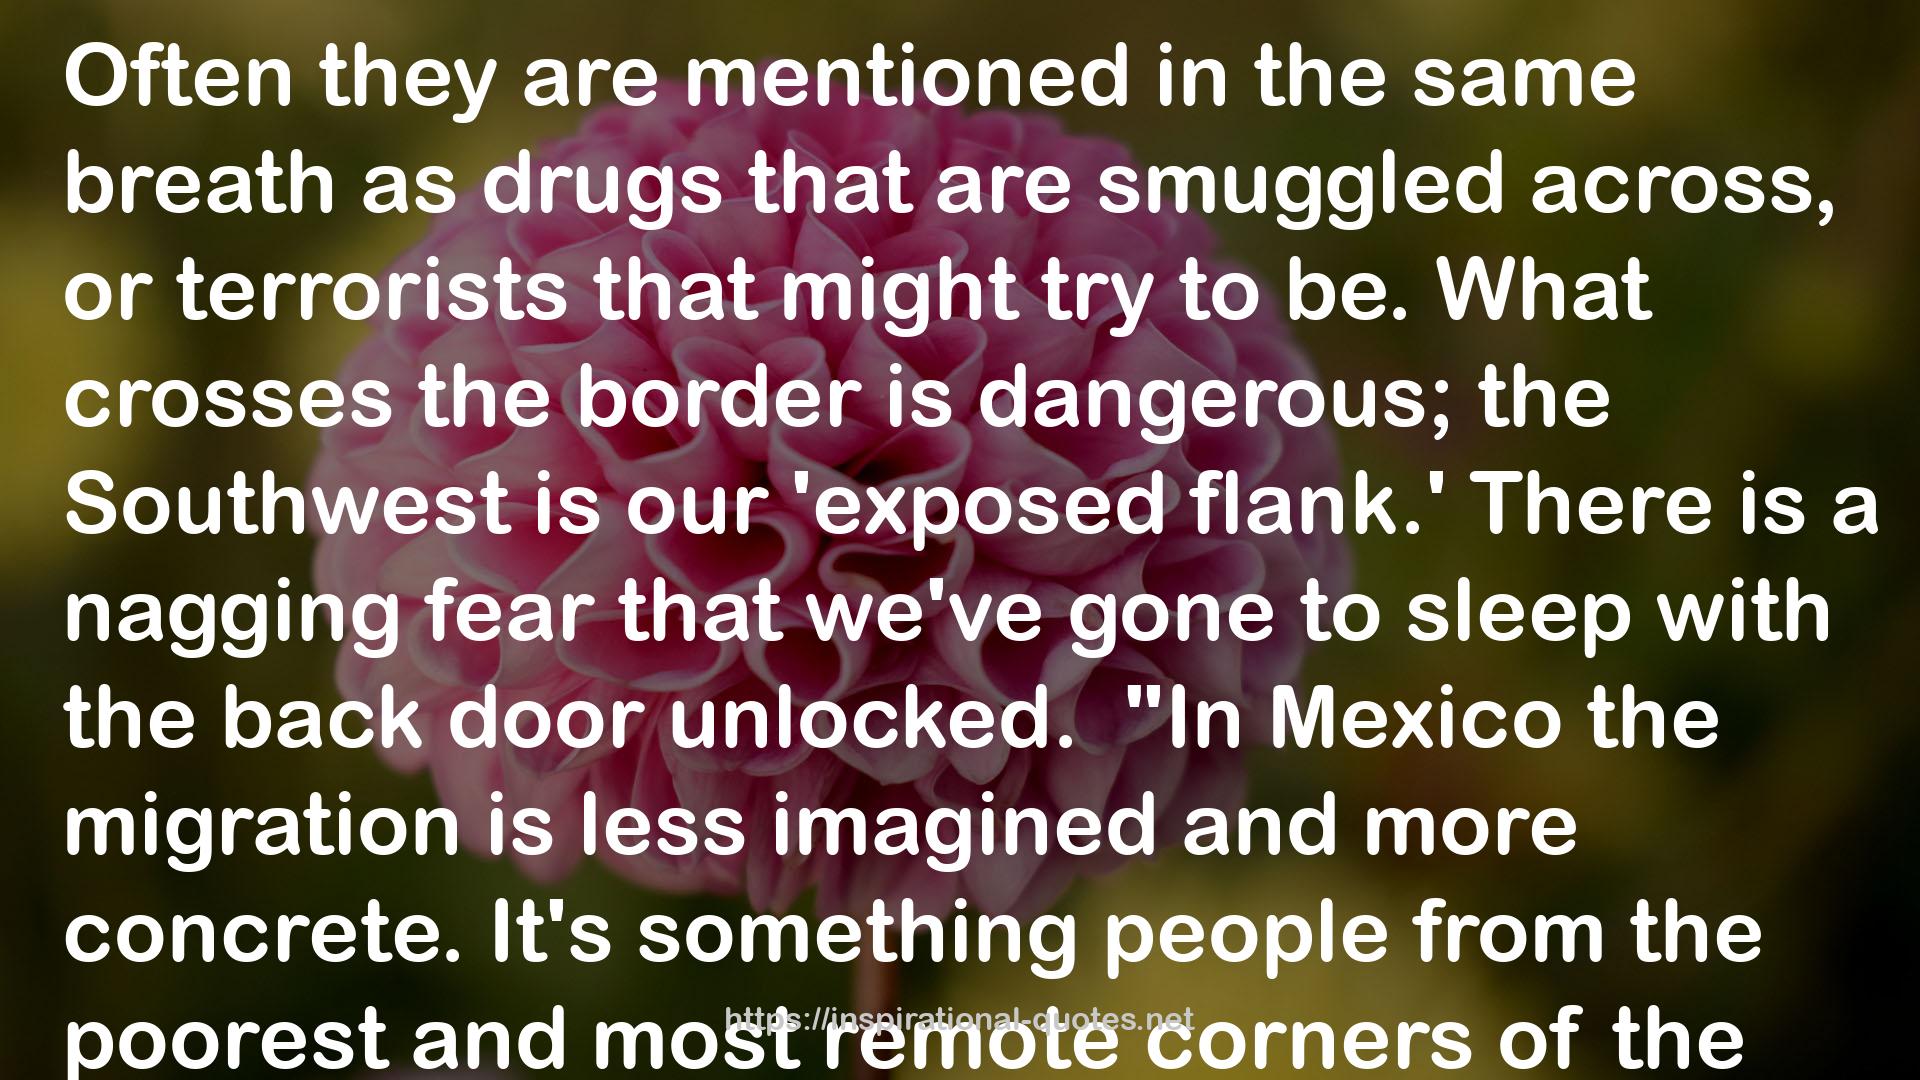 Coyotes: A Journey Through the Secret World of America's Illegal Aliens QUOTES